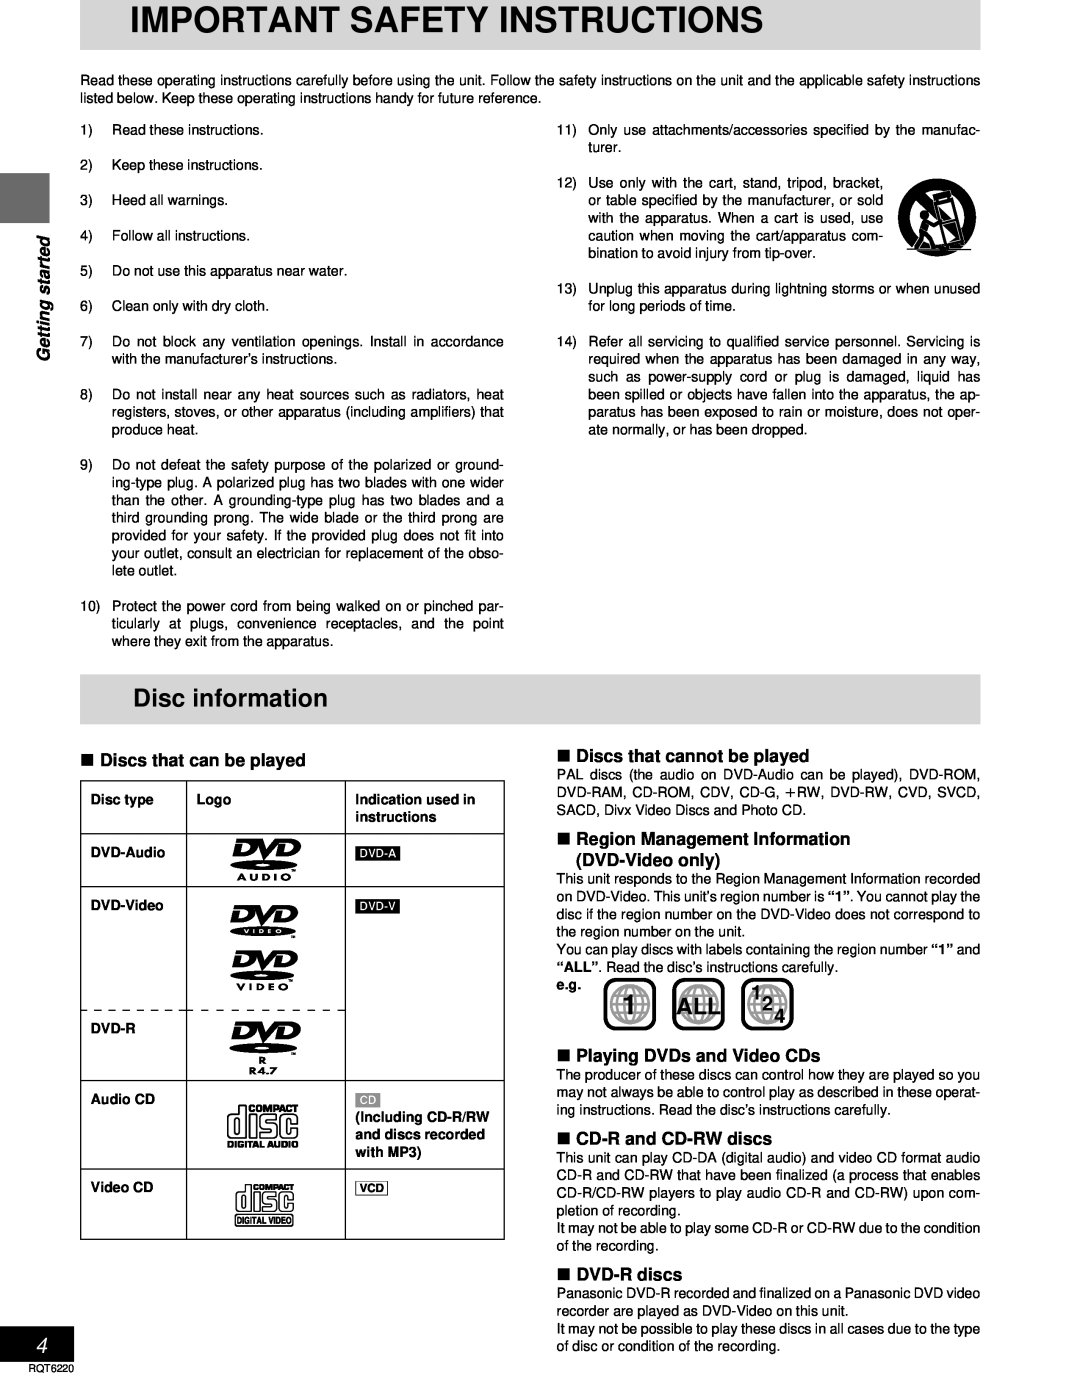 Panasonic SC-DM3 Important Safety Instructions, Disc information, Getting started, Discs that can be played, DVD-Rdiscs 